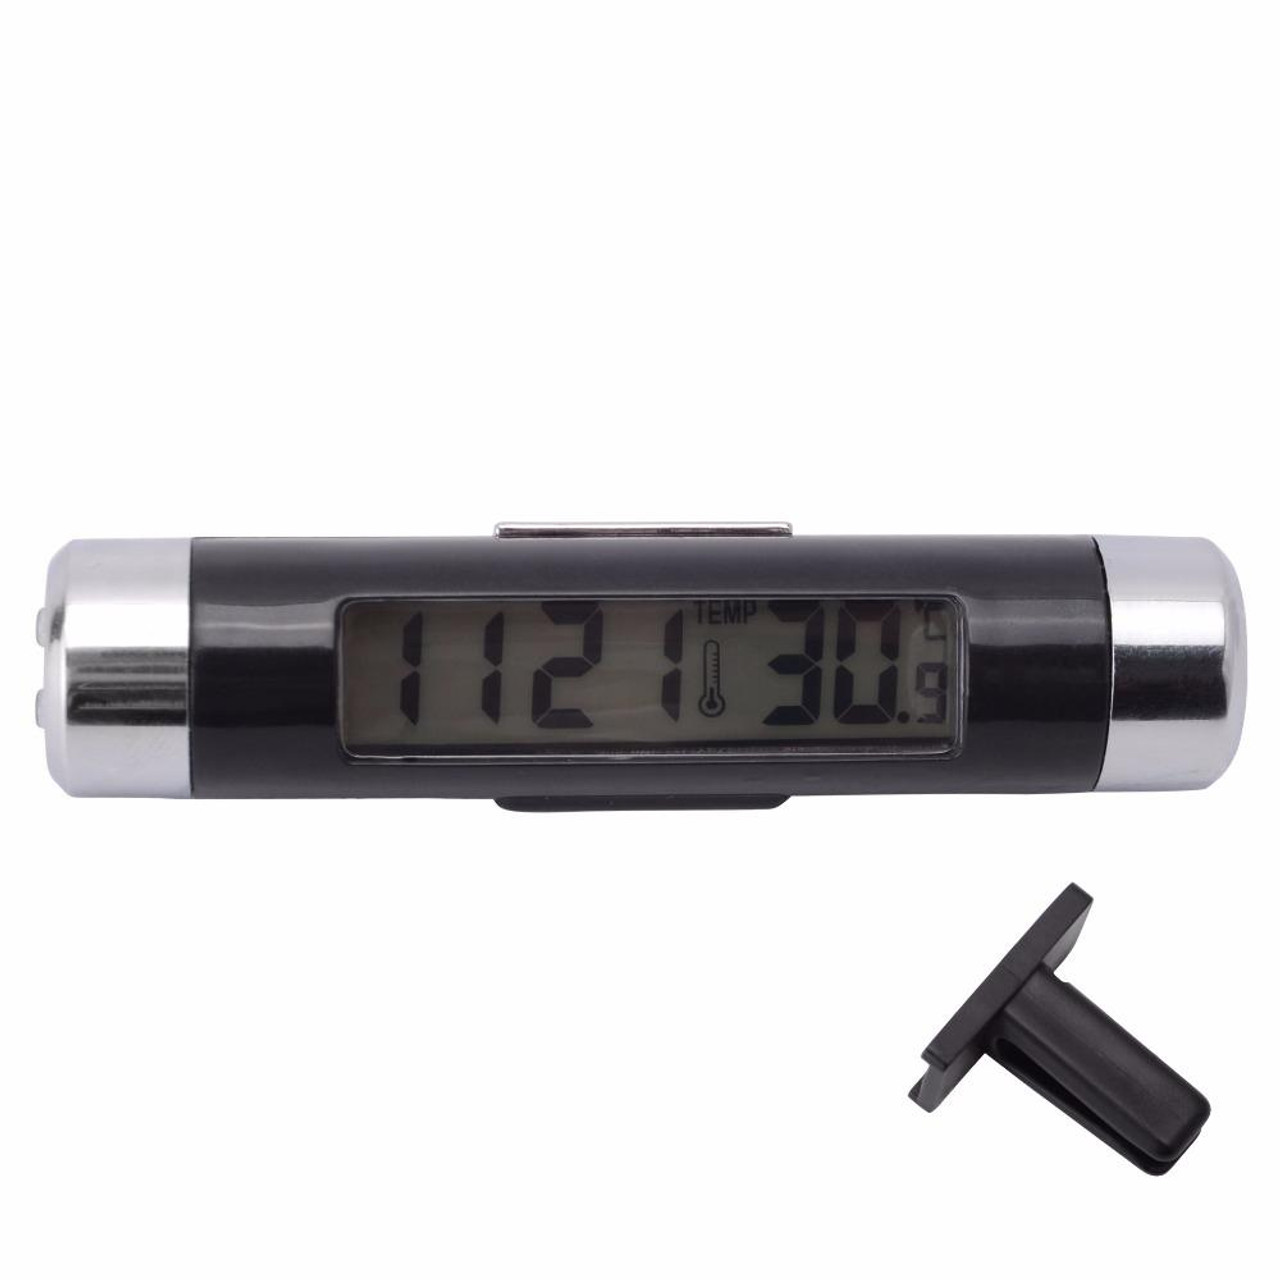 2 in 1 Car Auto Thermometer Clock Calendar LCD Display Screen, snatcher